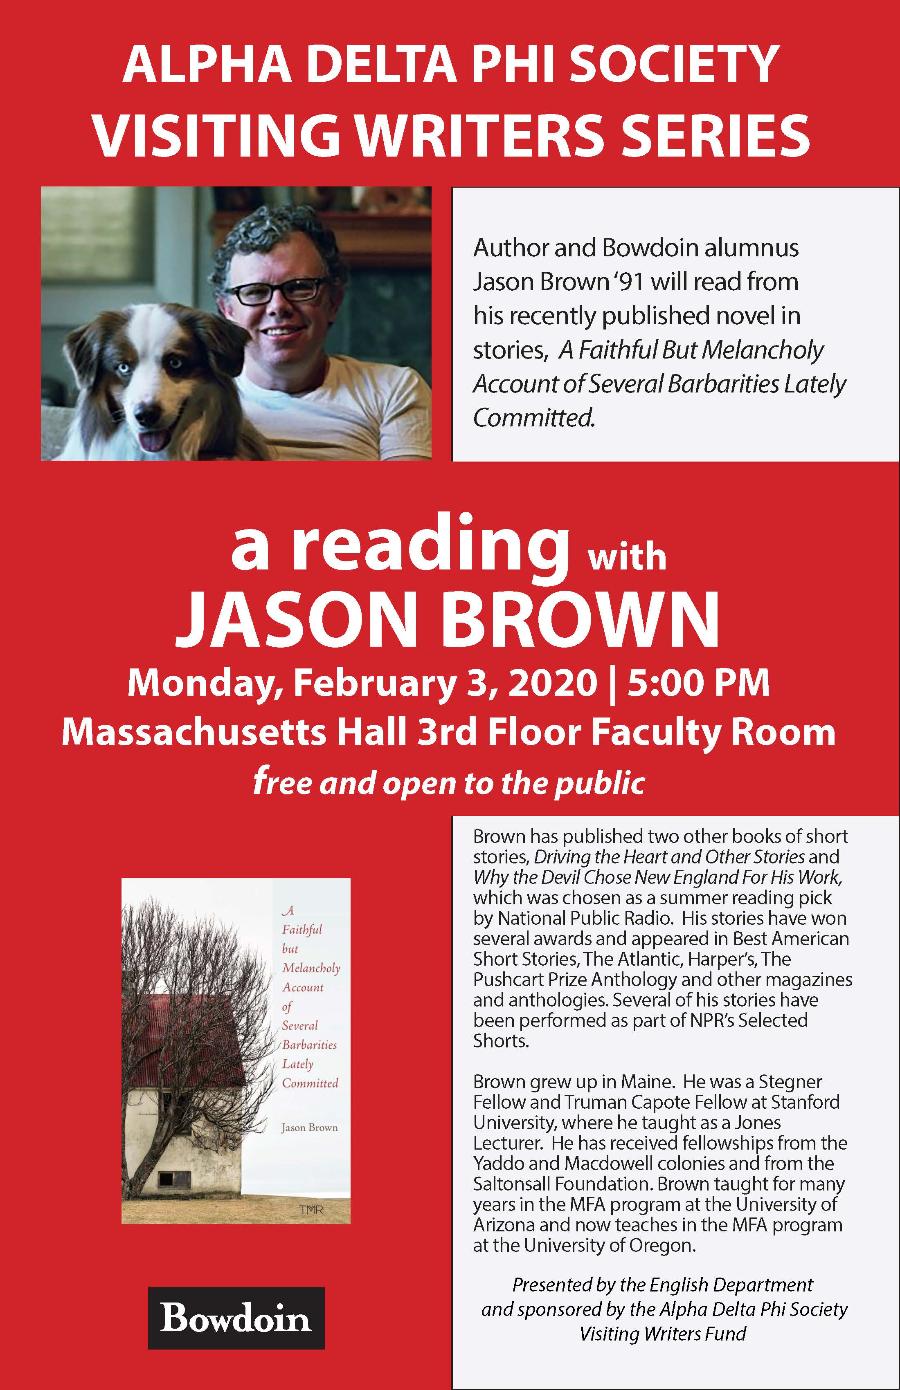 The poster for the Jason Brown event